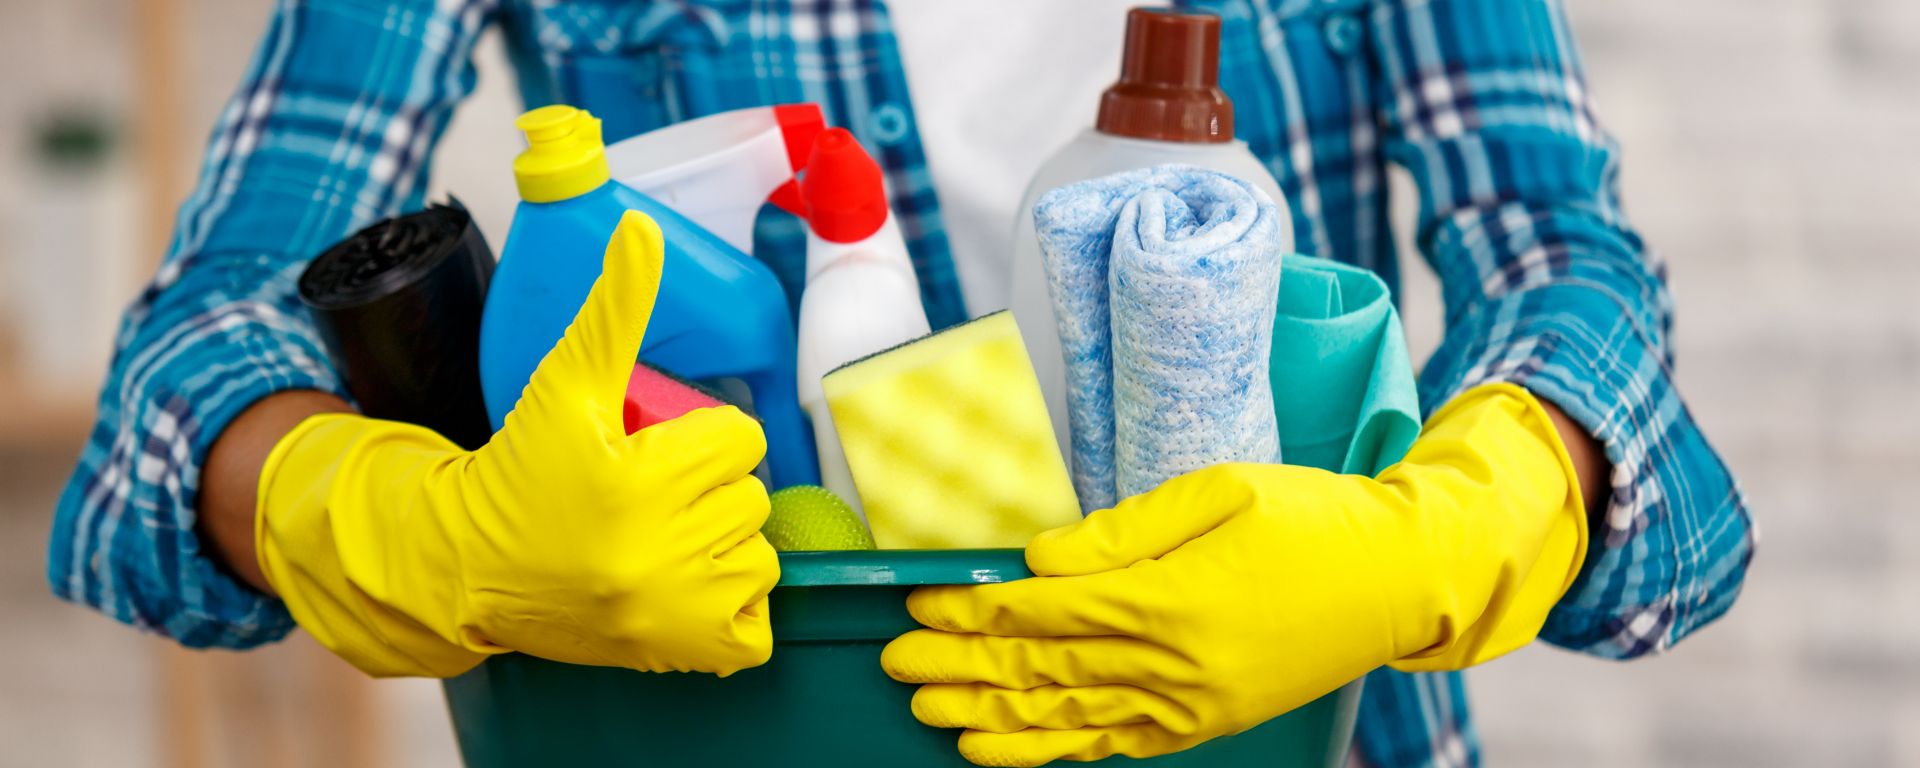 Cleaning Service In Barrie